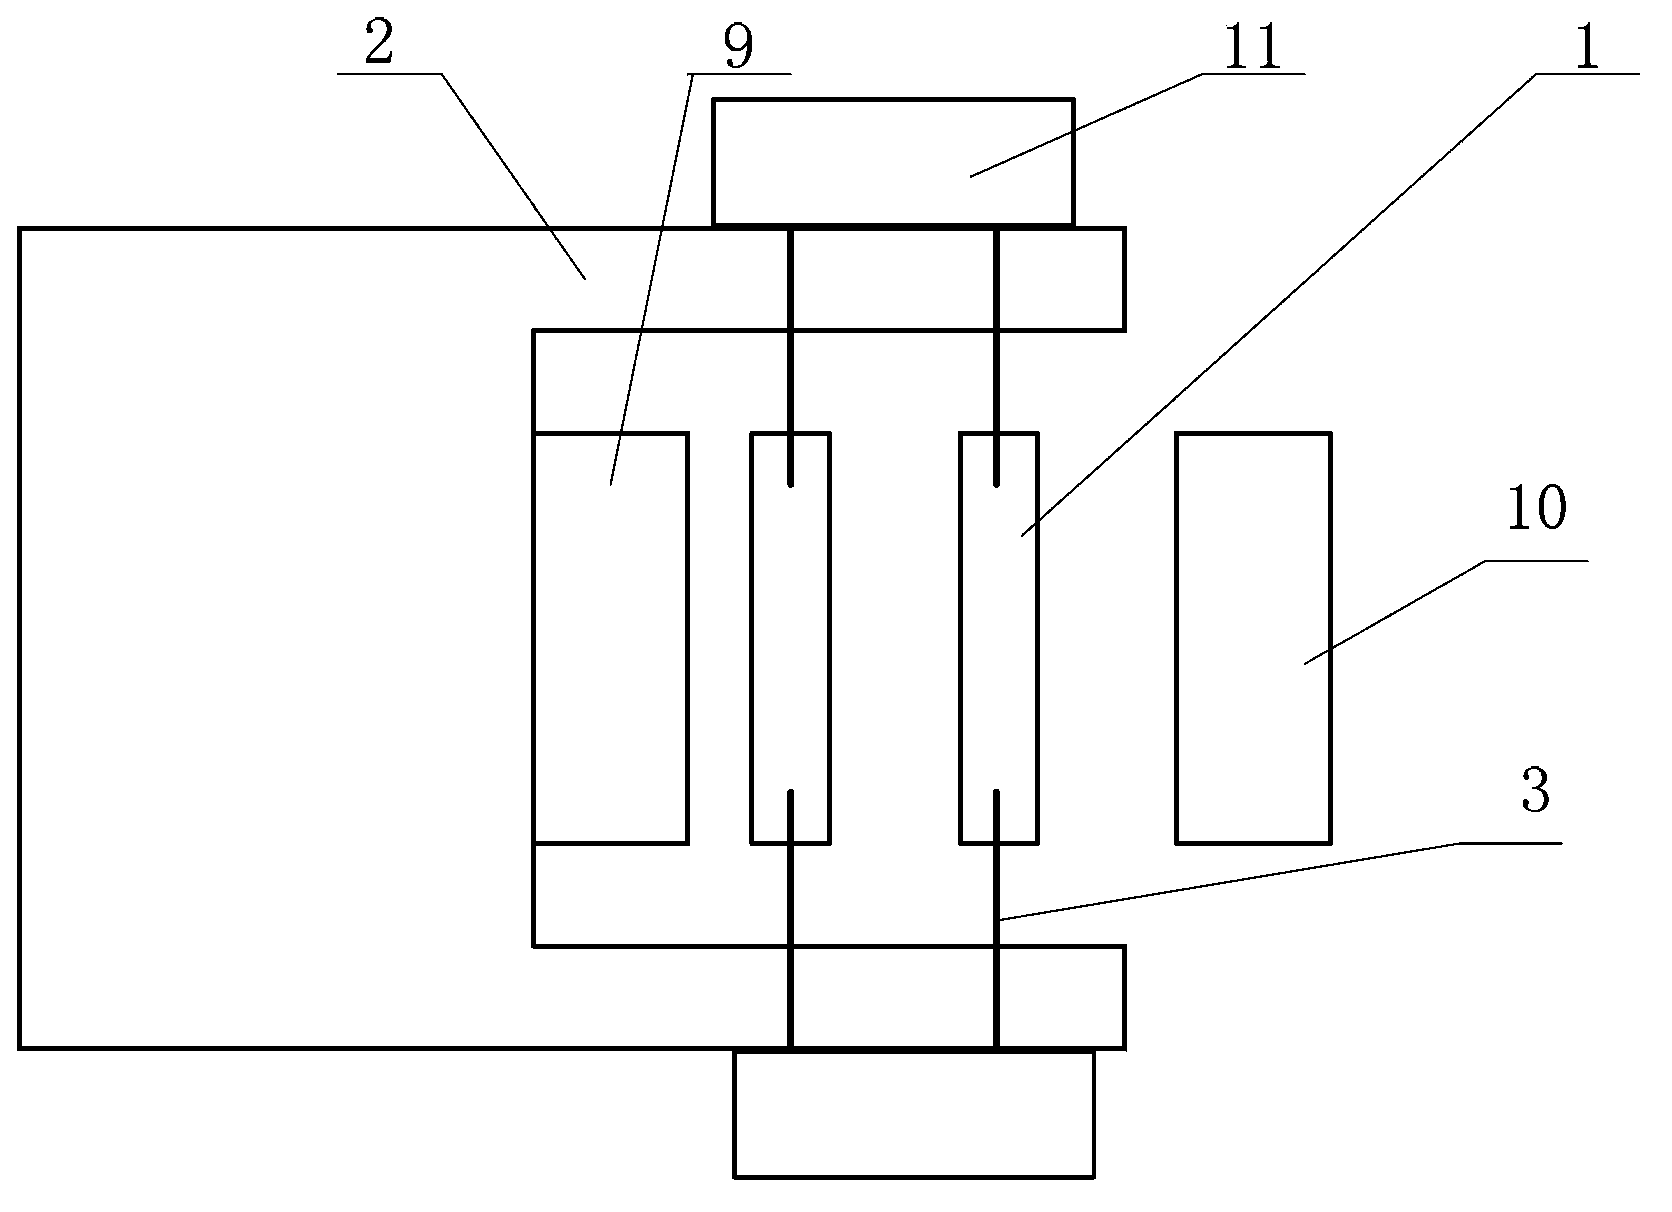 Cascade-stage-type electron beam diode